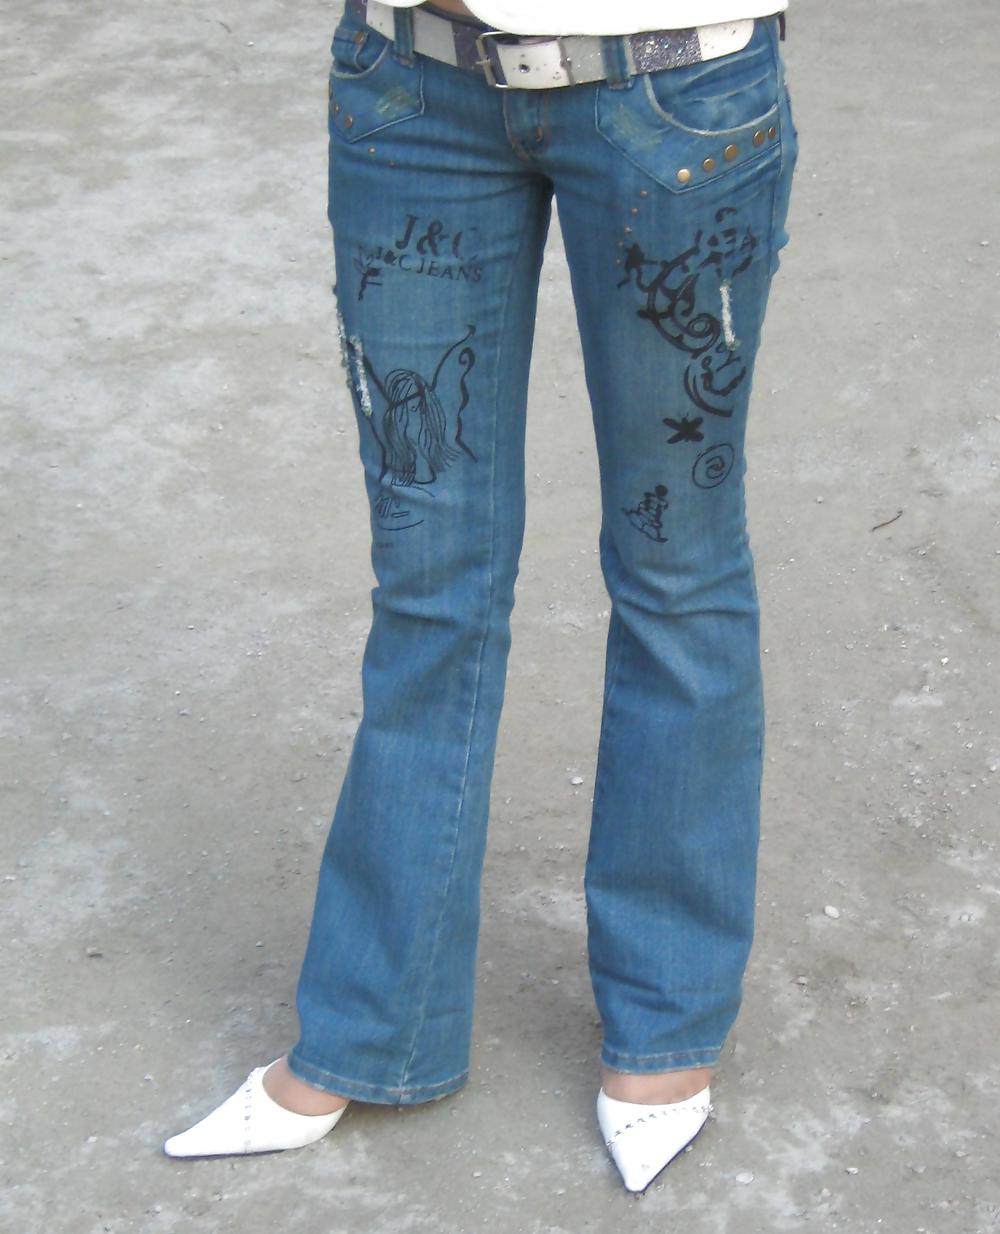 My Jeans #3701772